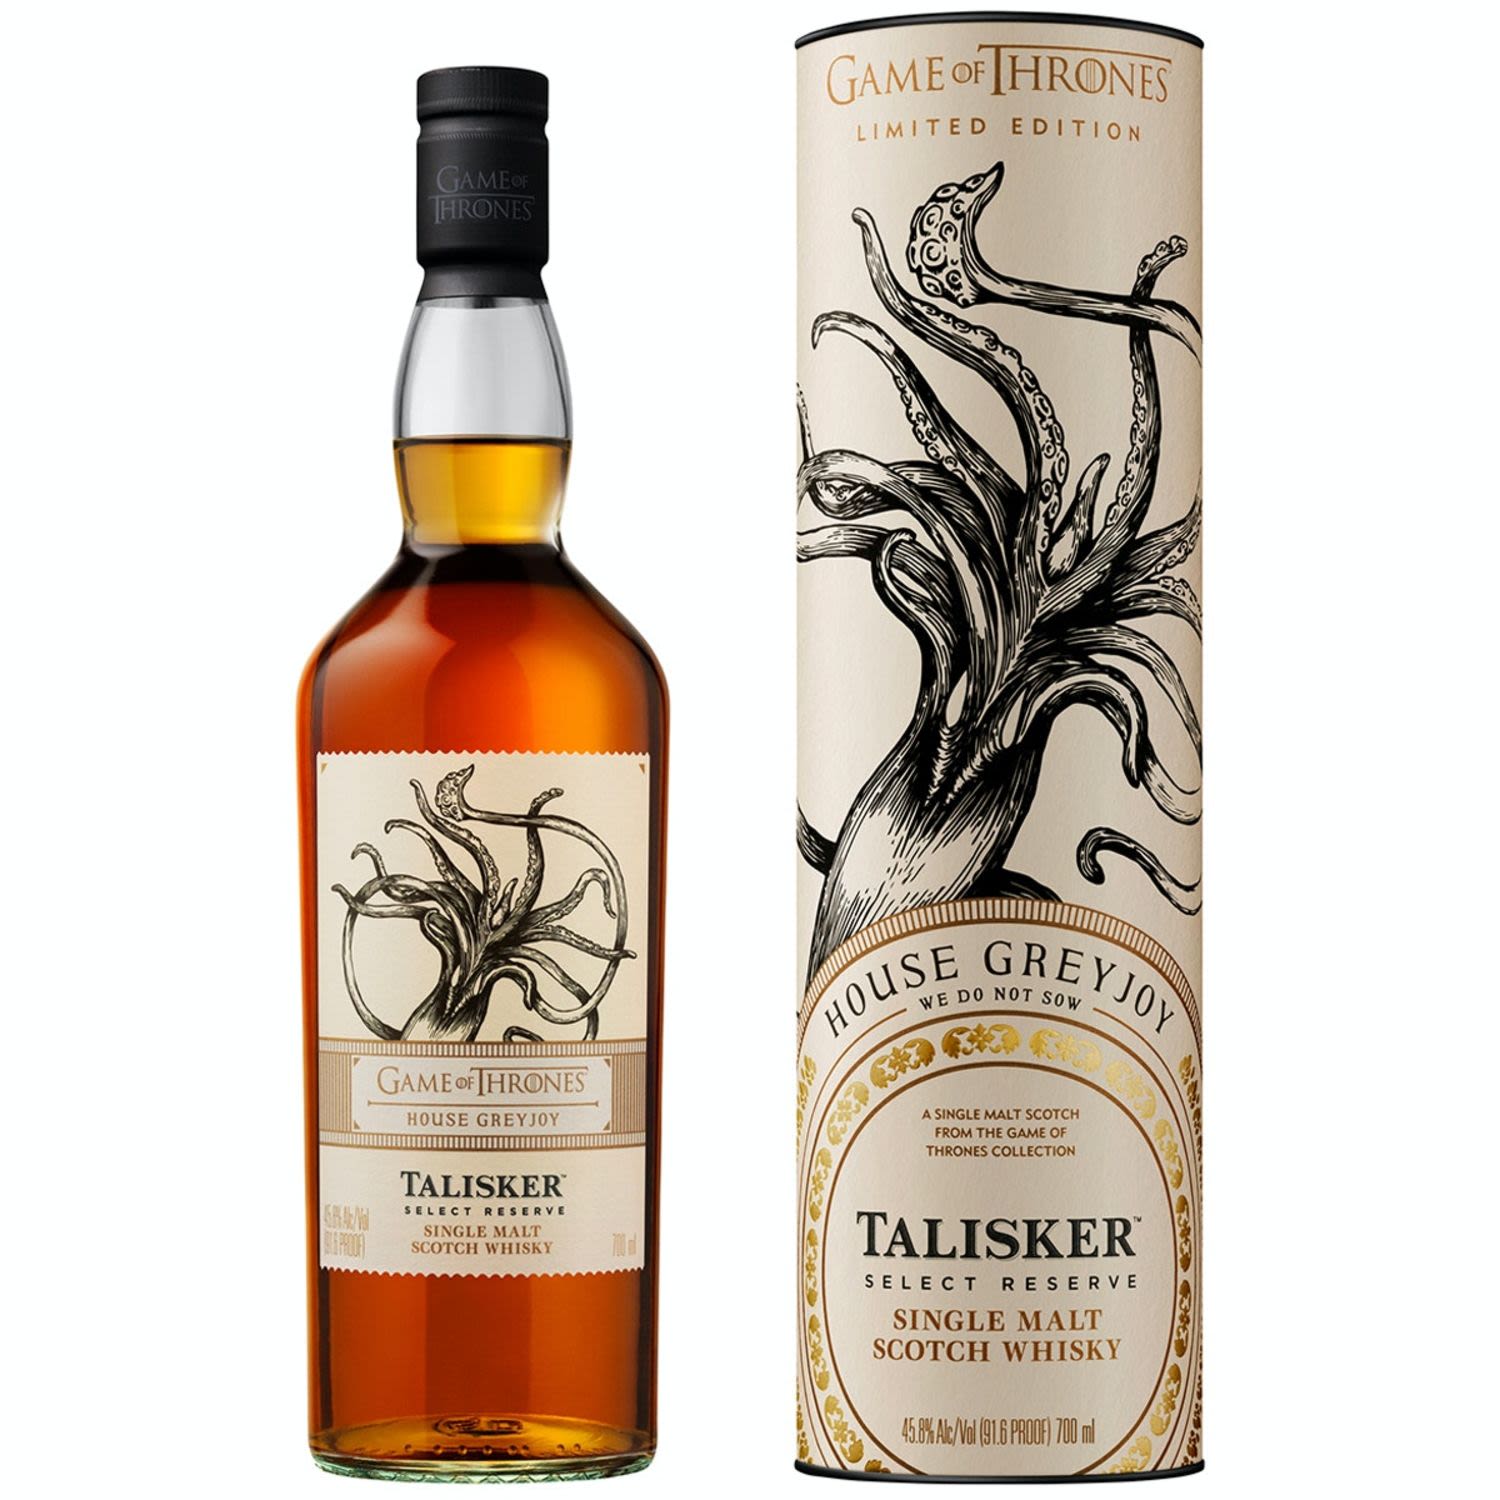 Game of Thrones House Greyjoy - Talisker Select Reserve Scotch Whisky 700mL Bottle